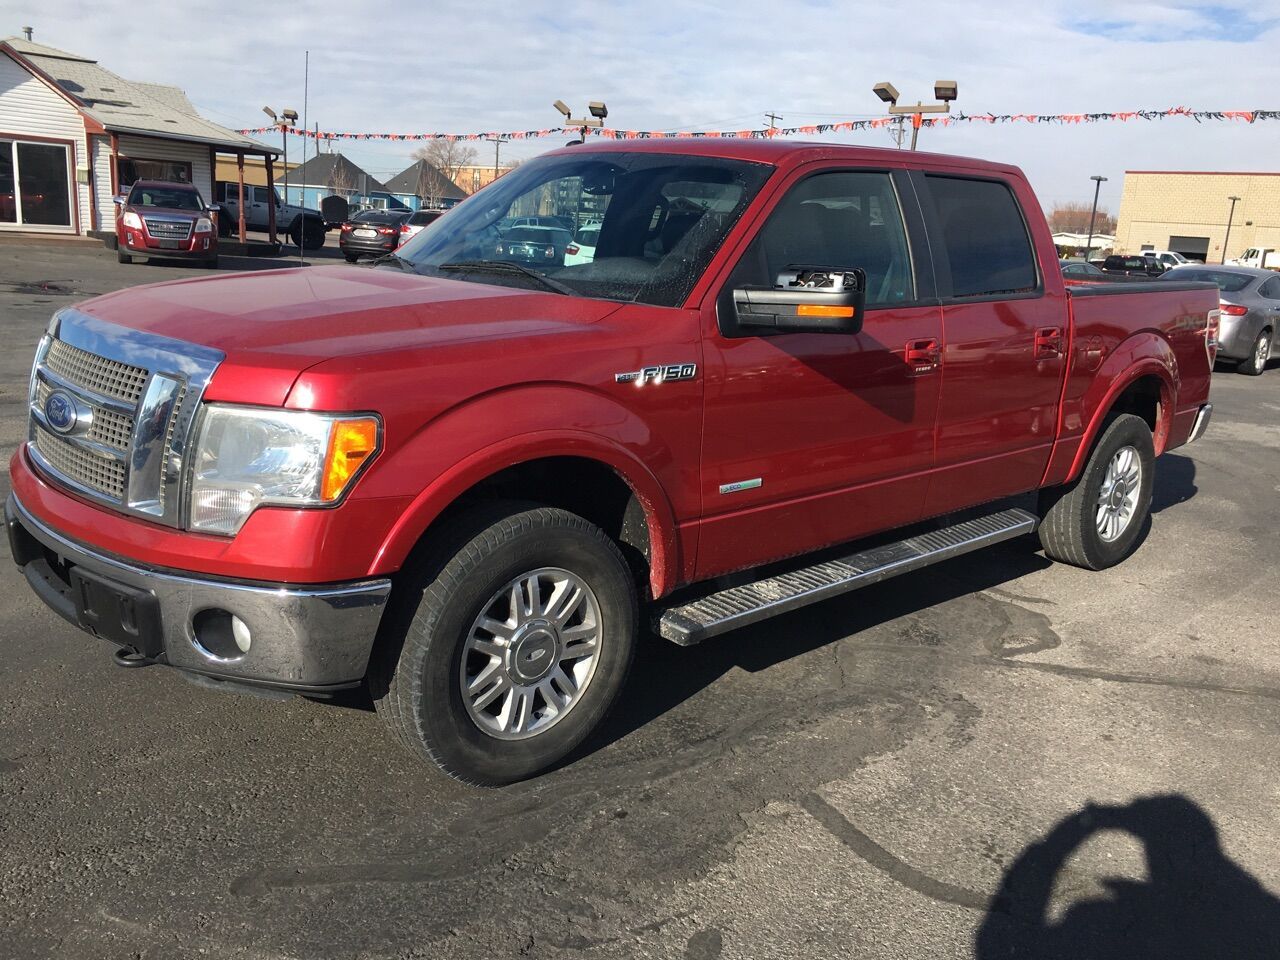 2012 - Ford - F-150 - $23,200